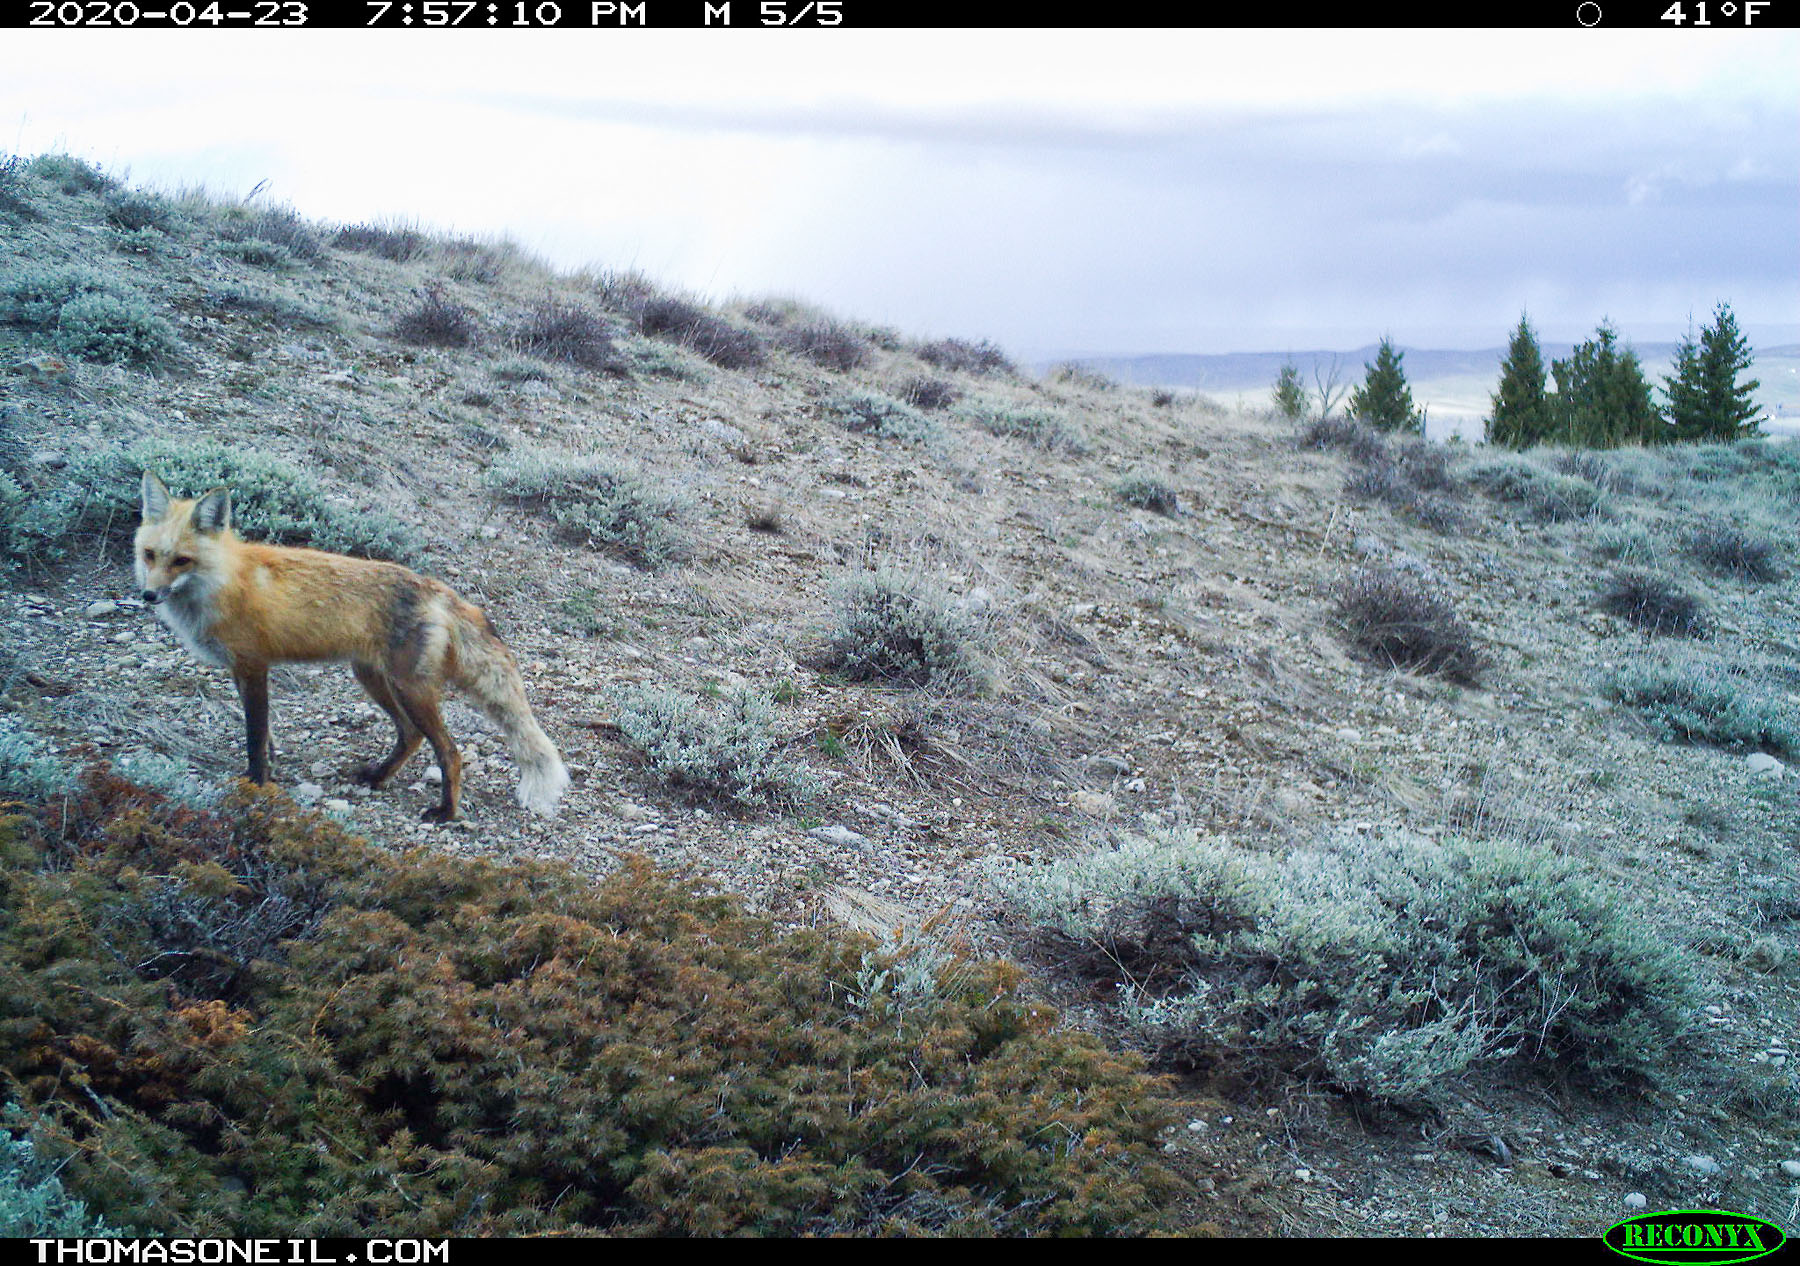 Fox near Luther, MT, 2020.